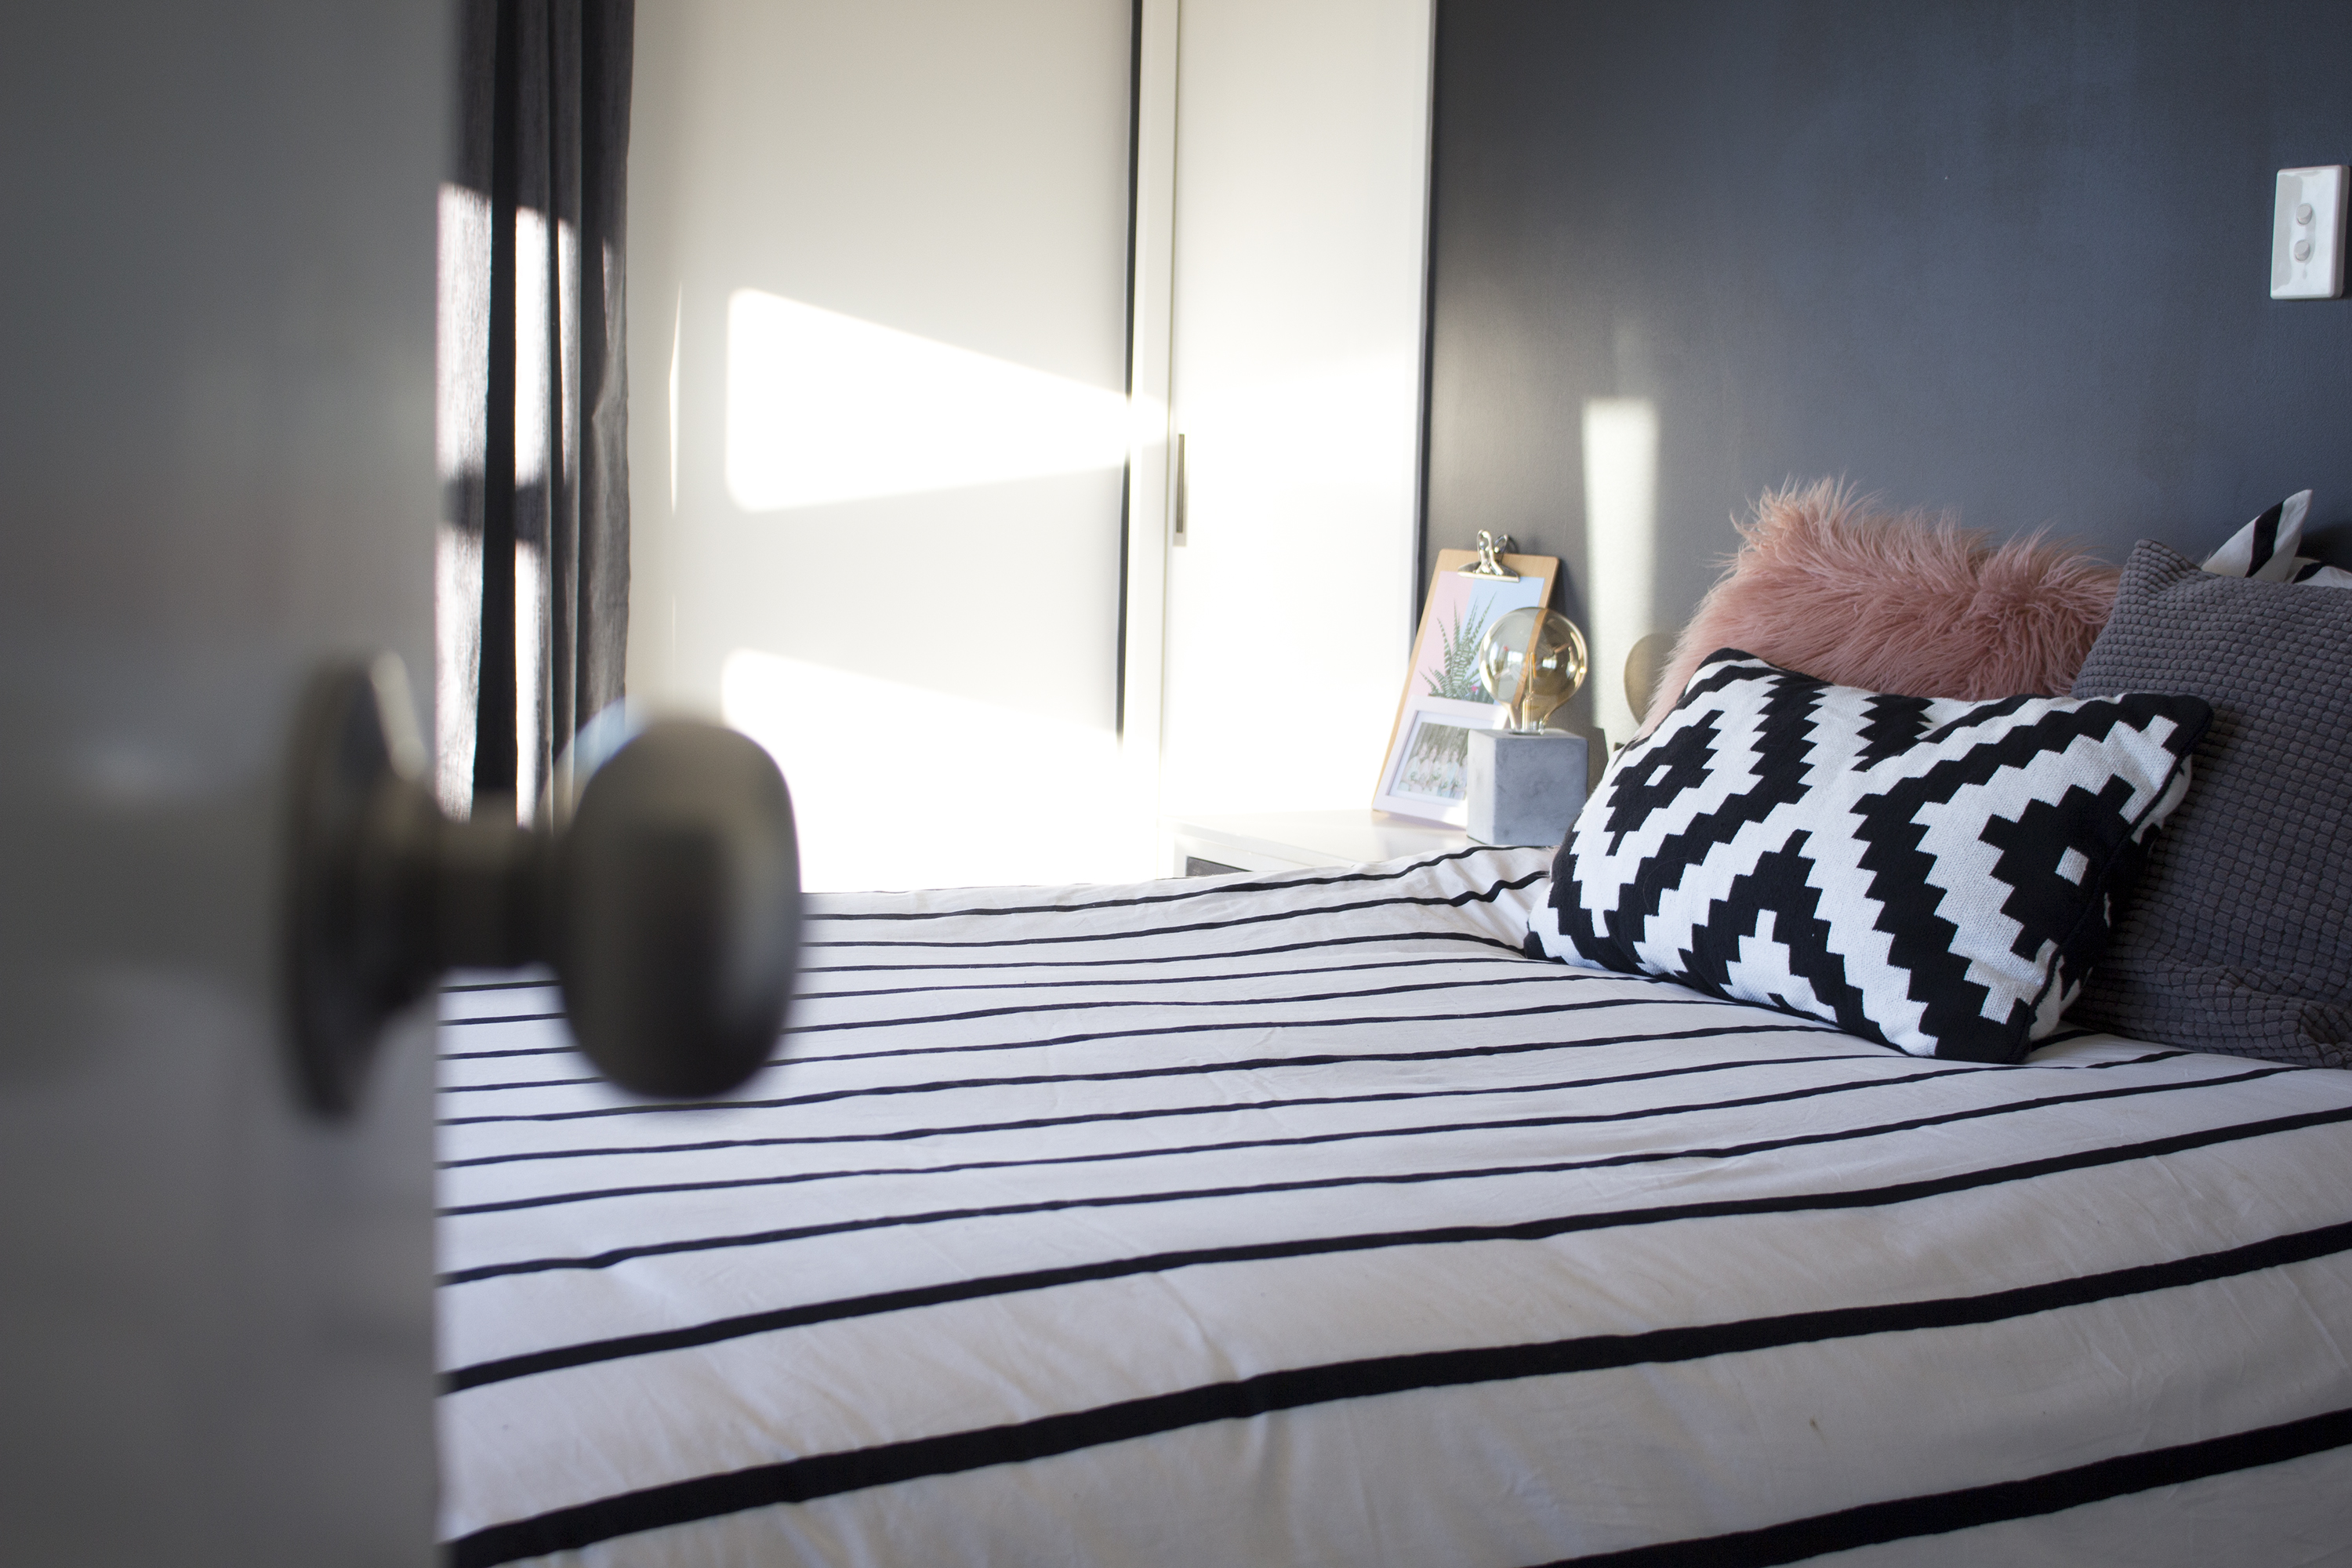 Need some master bedroom inspo? Take a look at our fresh, new, scandi bedroom with a black feature wall!